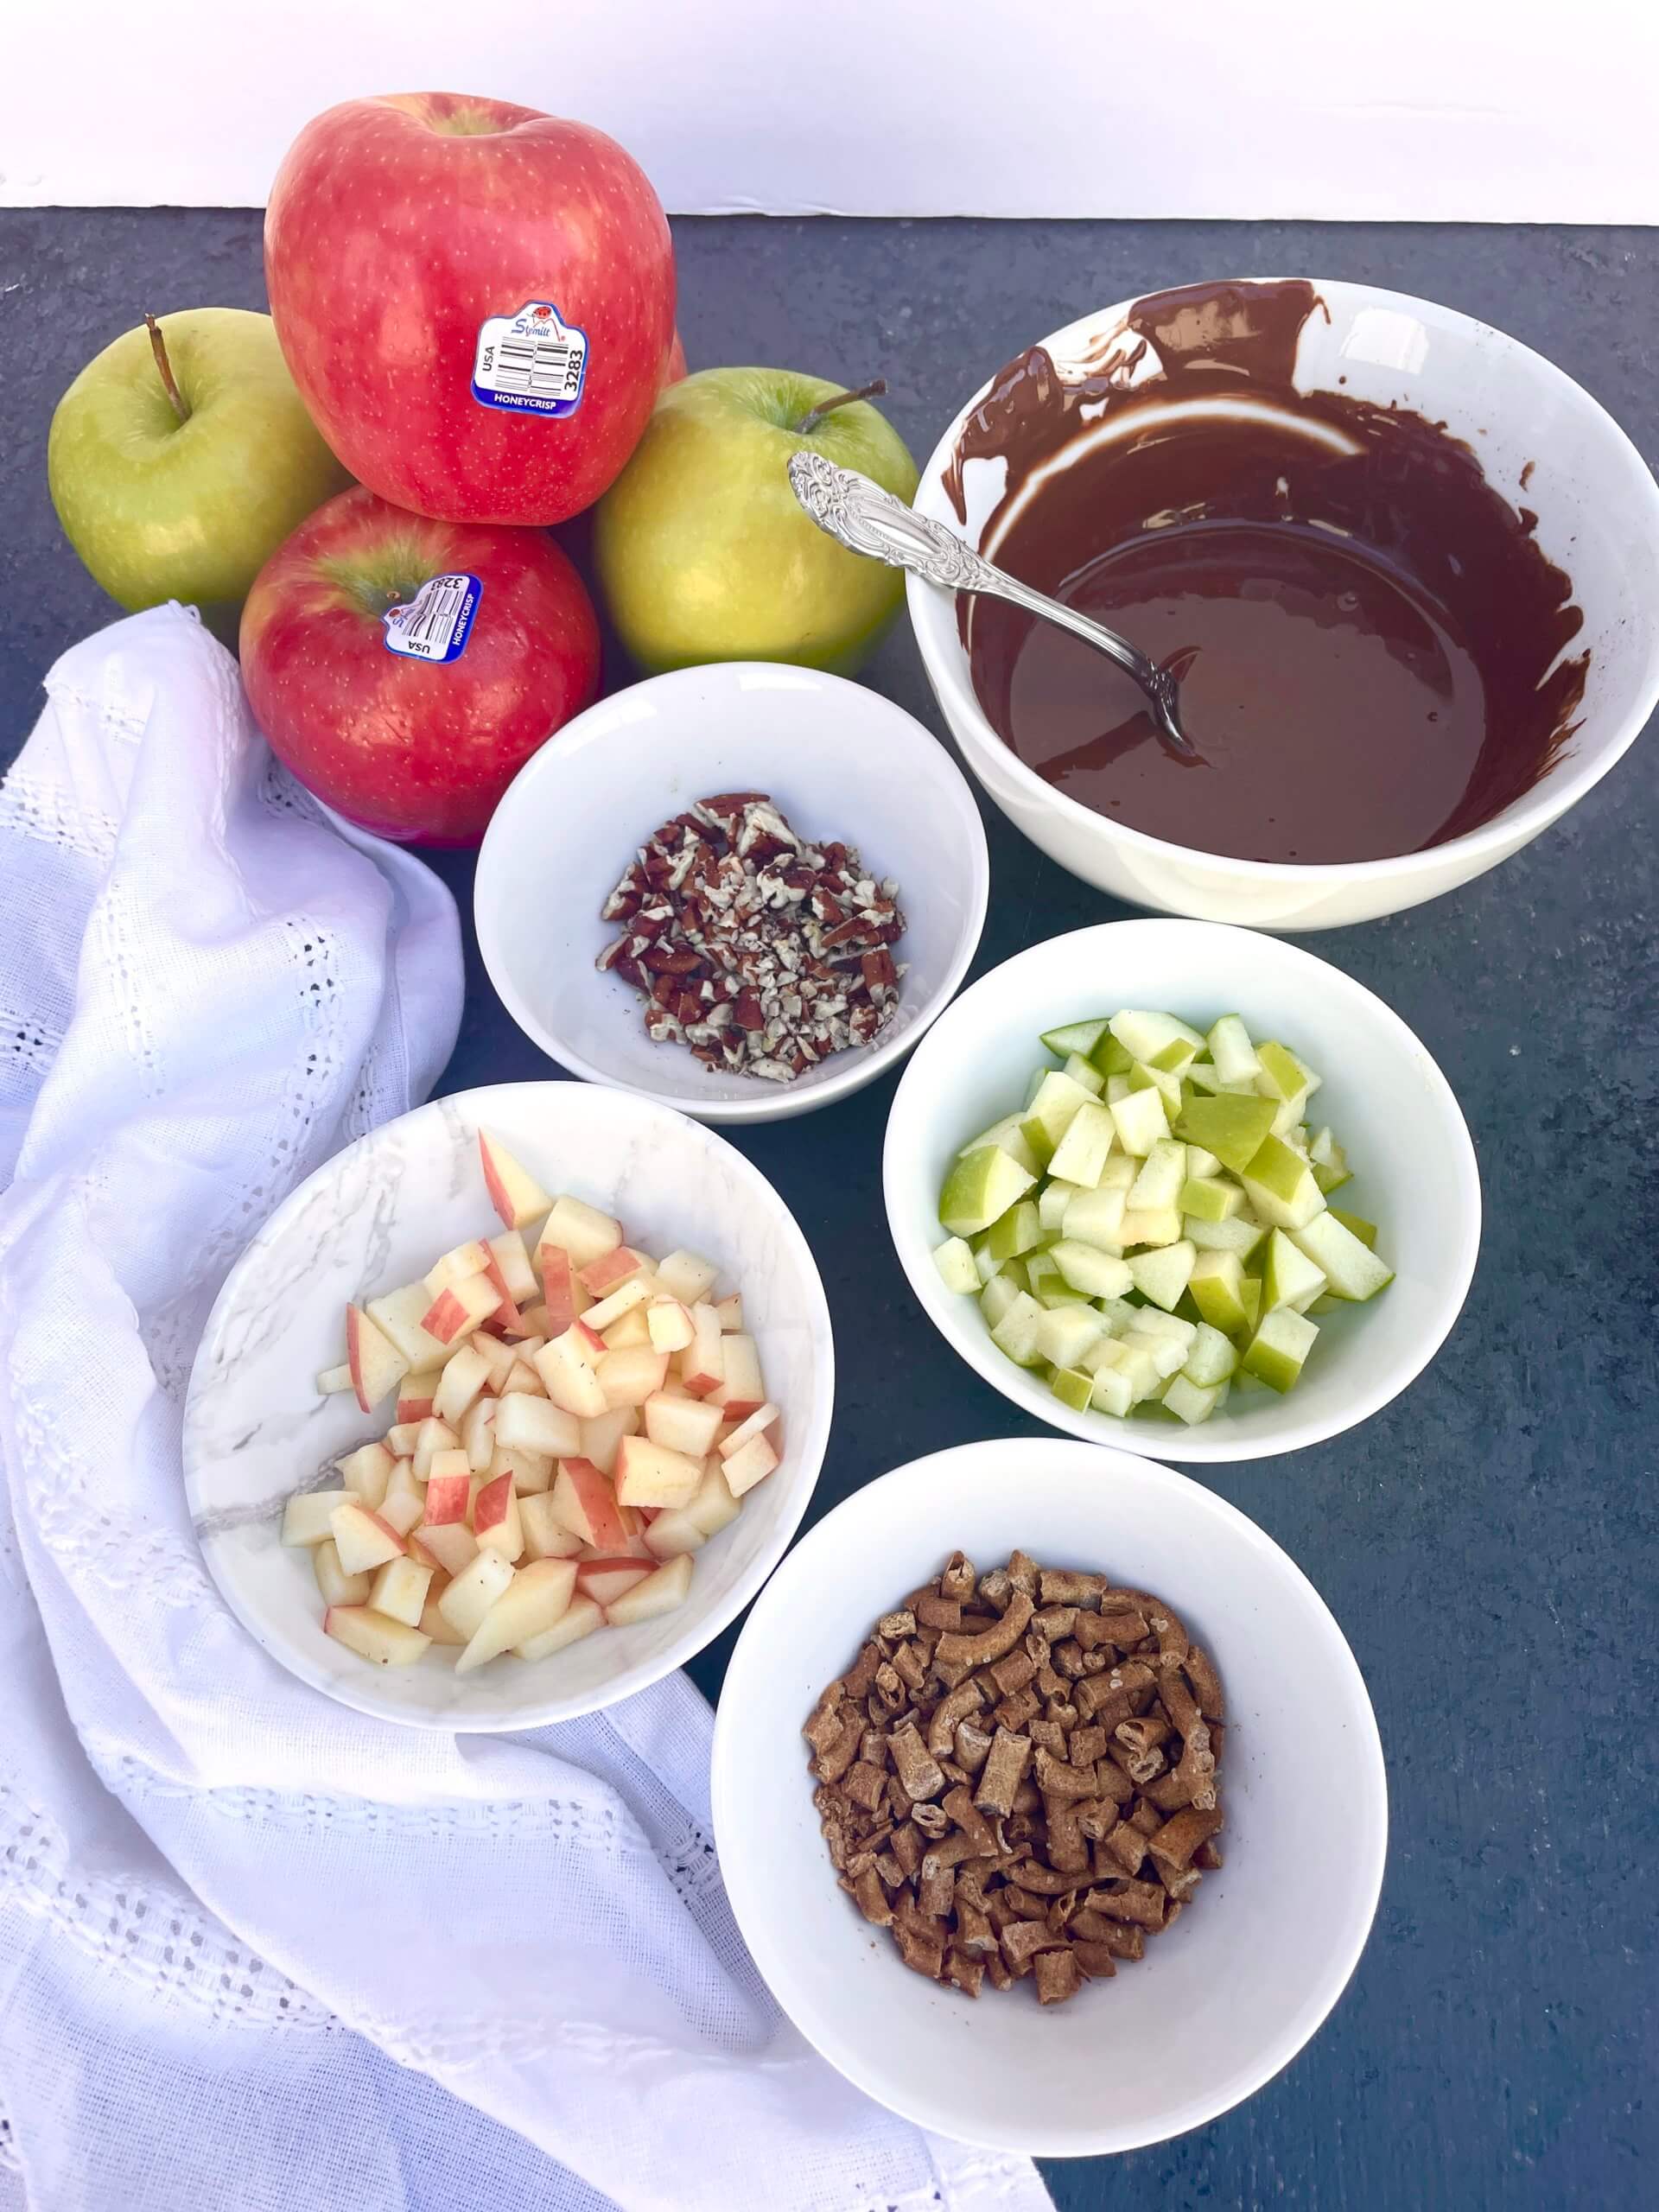 Apples, Caramel, pretzels, and almonds in ingredients bowls